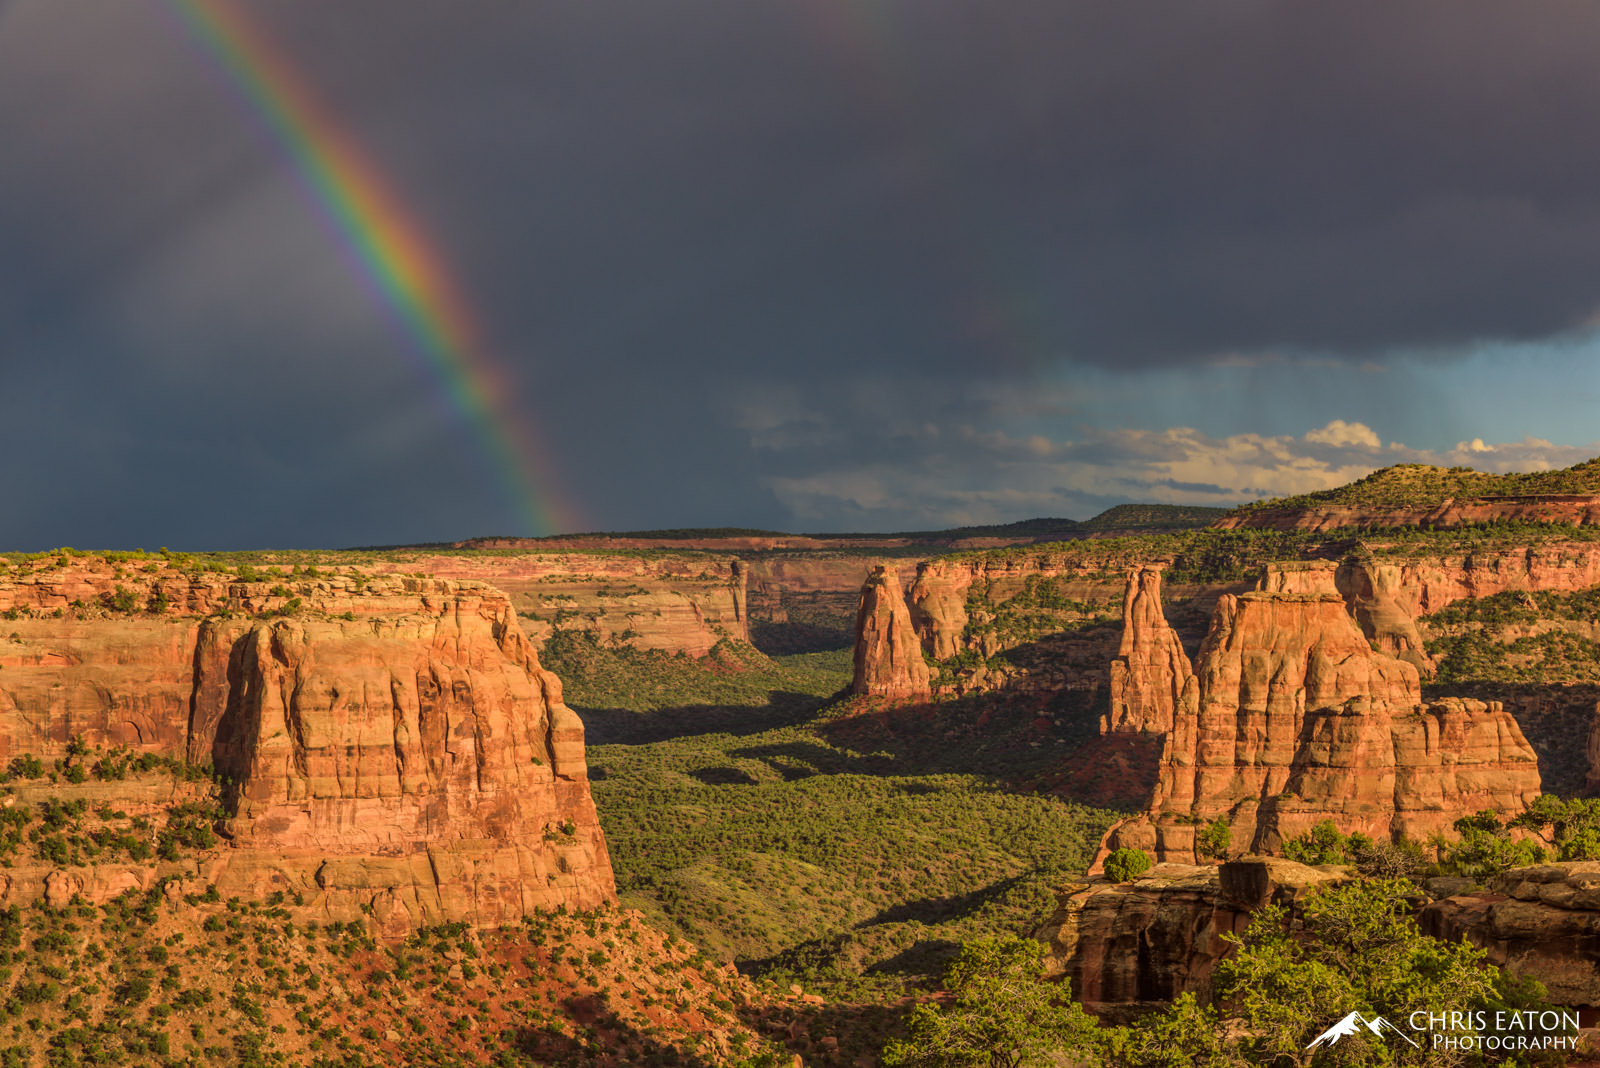 The end of the rainbow reaches to Monument Canyon in Colorado National Monument as the sun begins to set on the remnants of a...